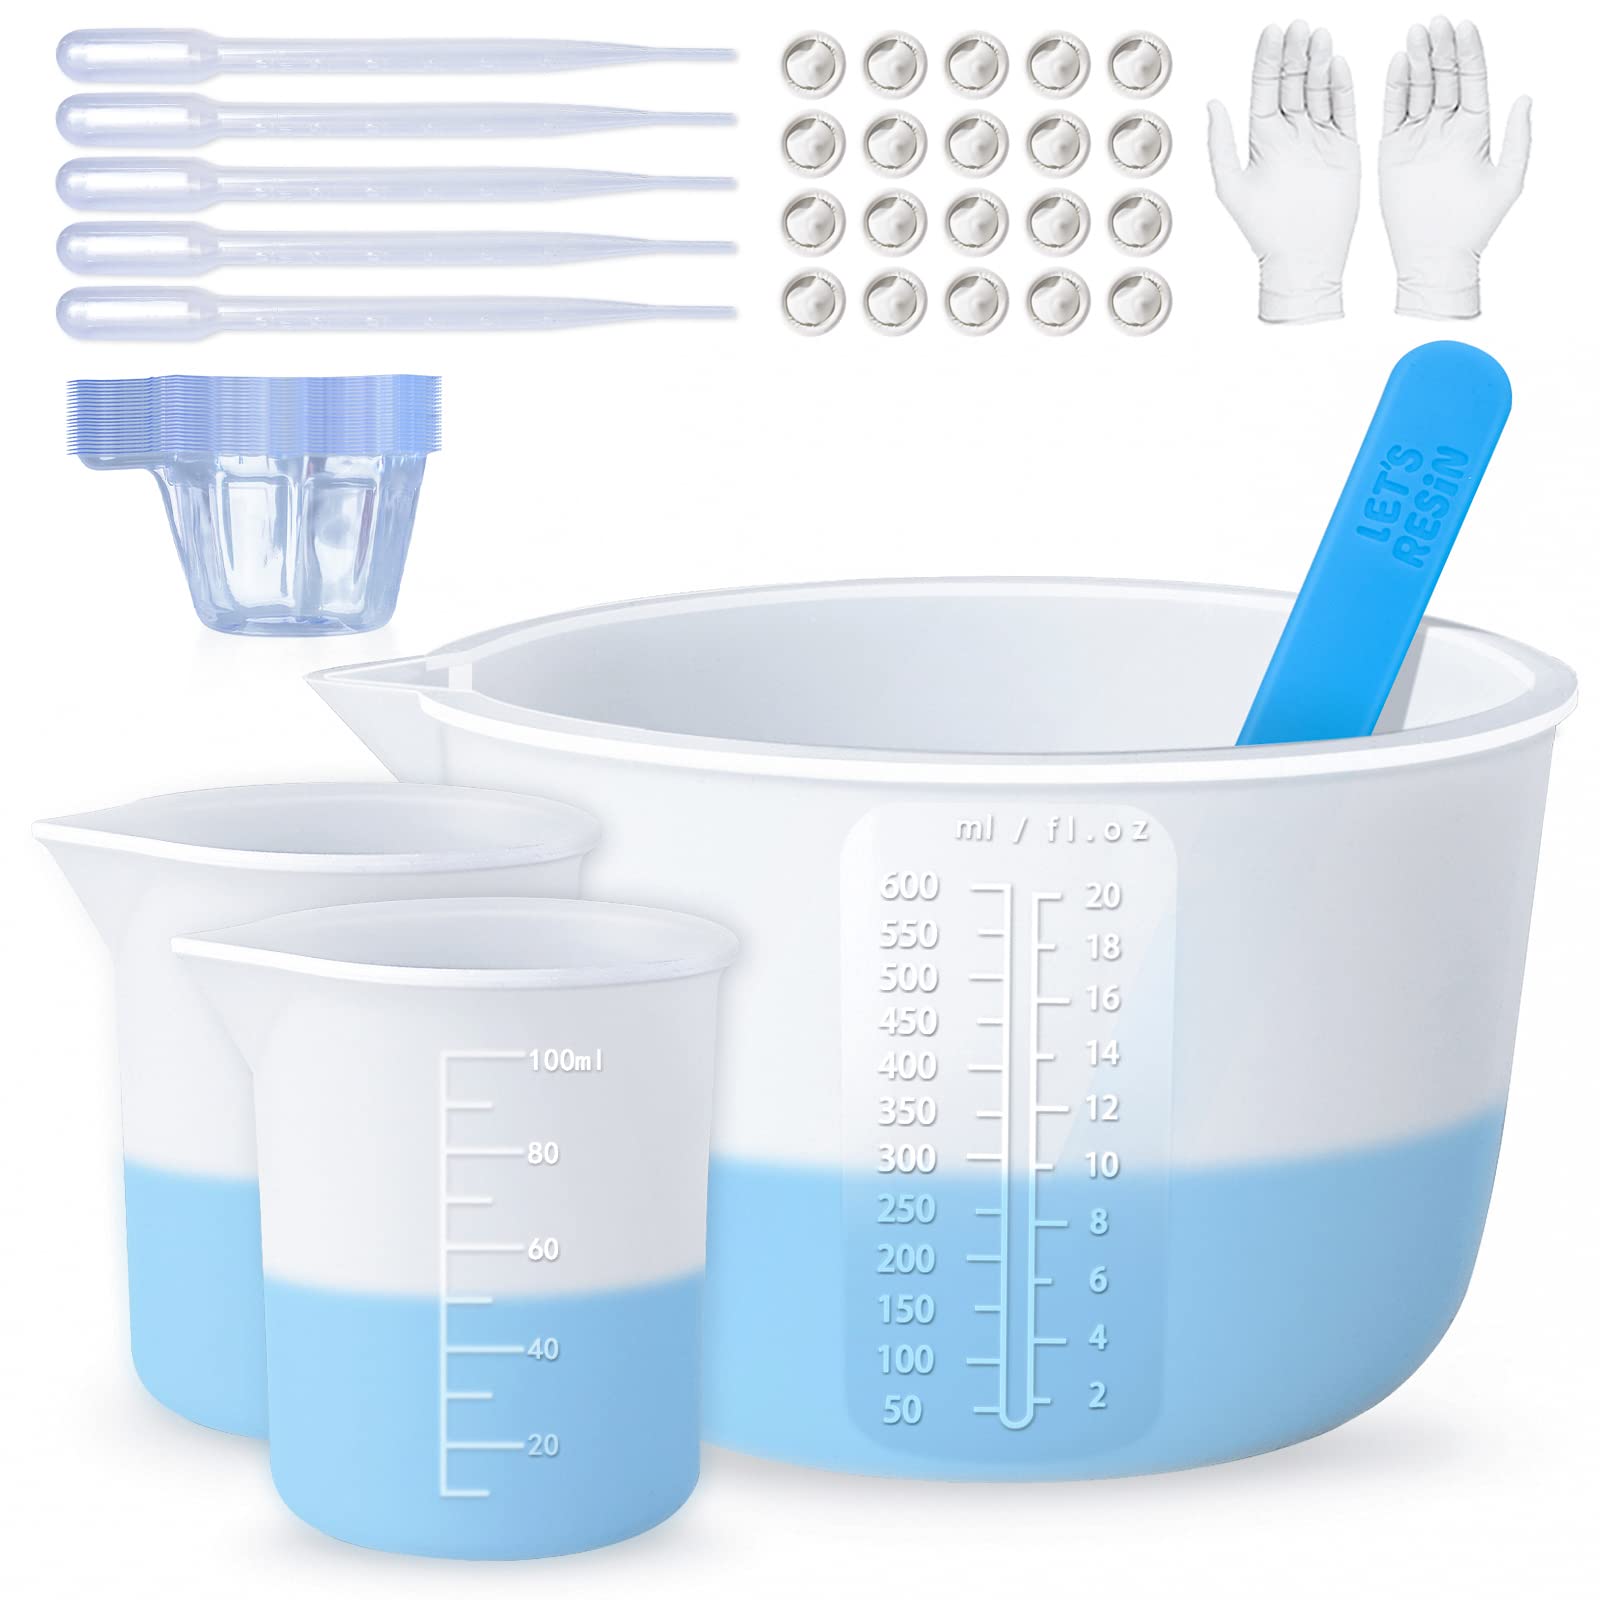 LET'S RESIN Silicone Measuring Cups,Resin Supplies with 600ml/20oz&100ml  Thickening&Polishing Resin Mixing Cups,Easy to Clean,Silicone Stir  Sticks,Silicone Cups for Epoxy Resin Mixing